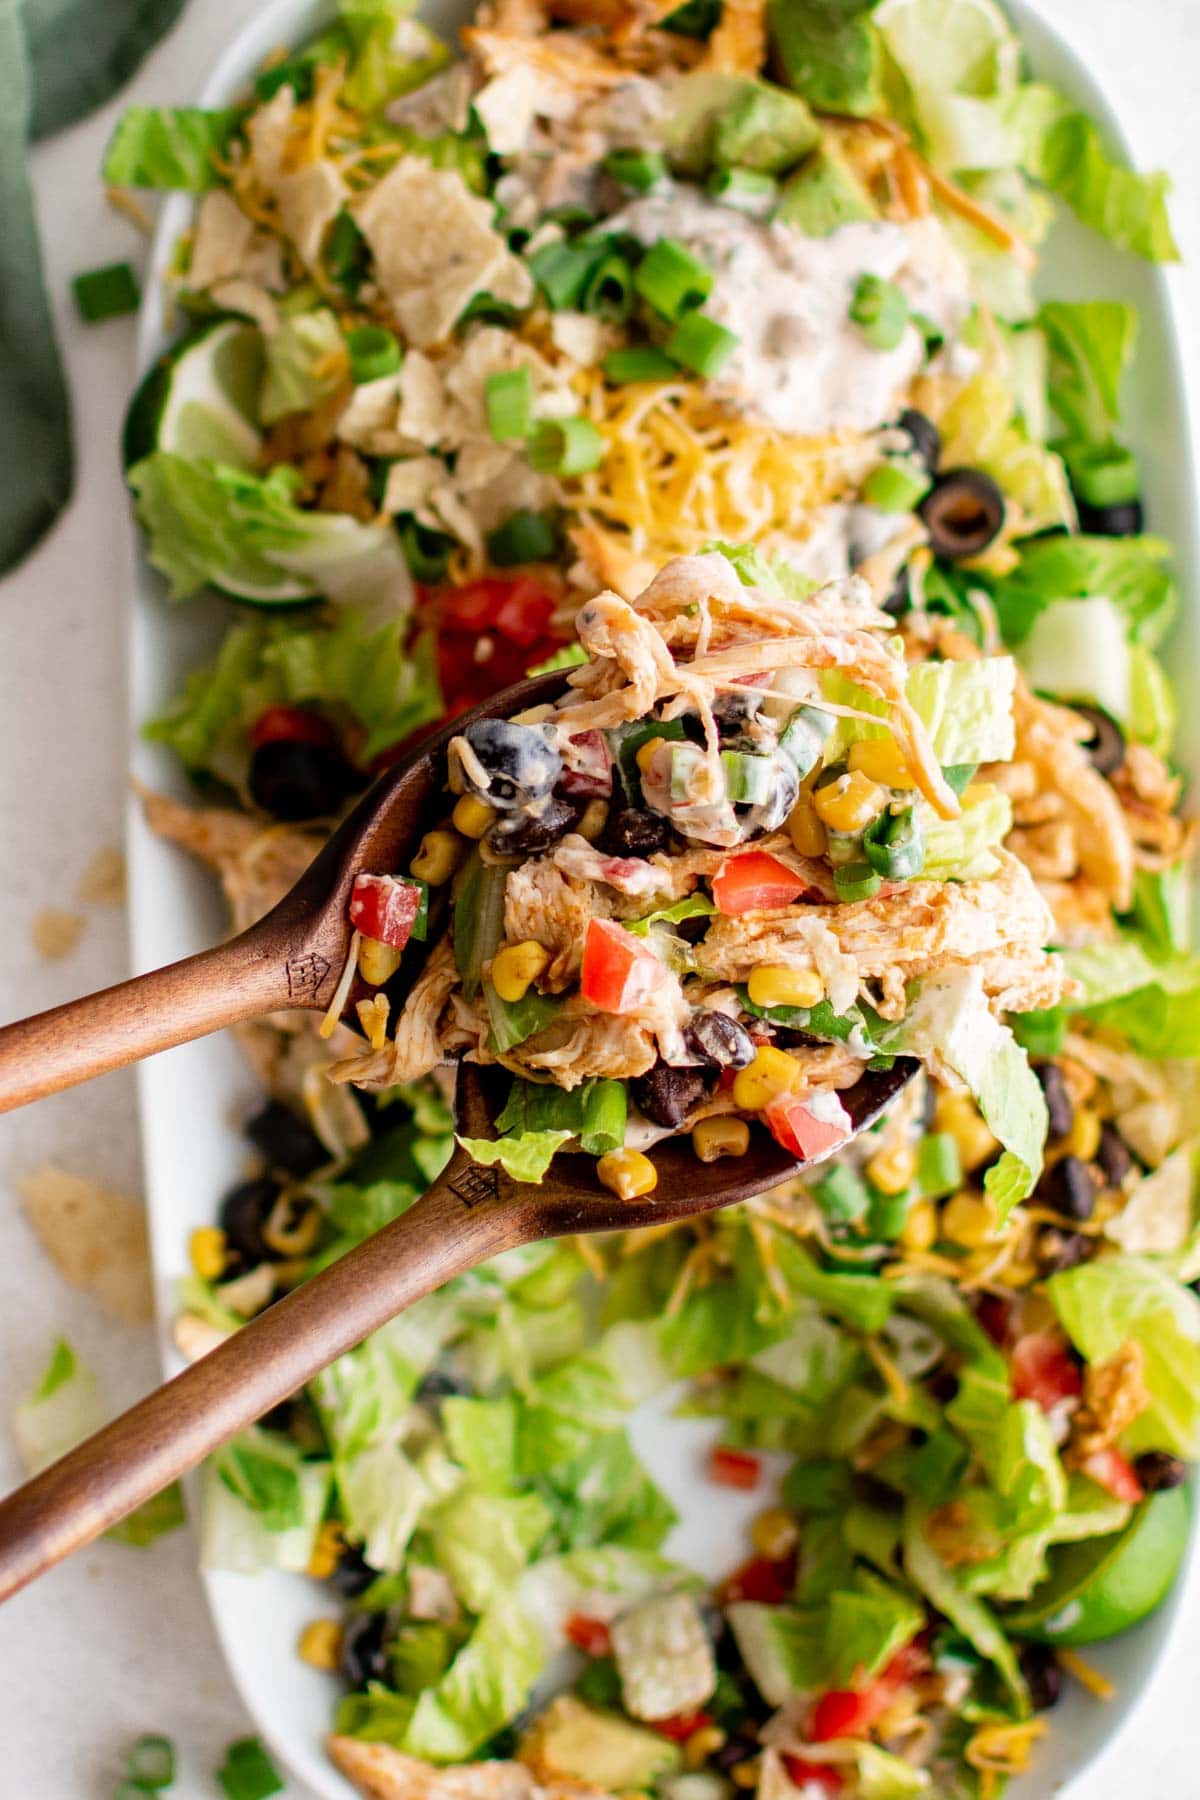 Salad tongs holding up a serving of chicken taco salad.